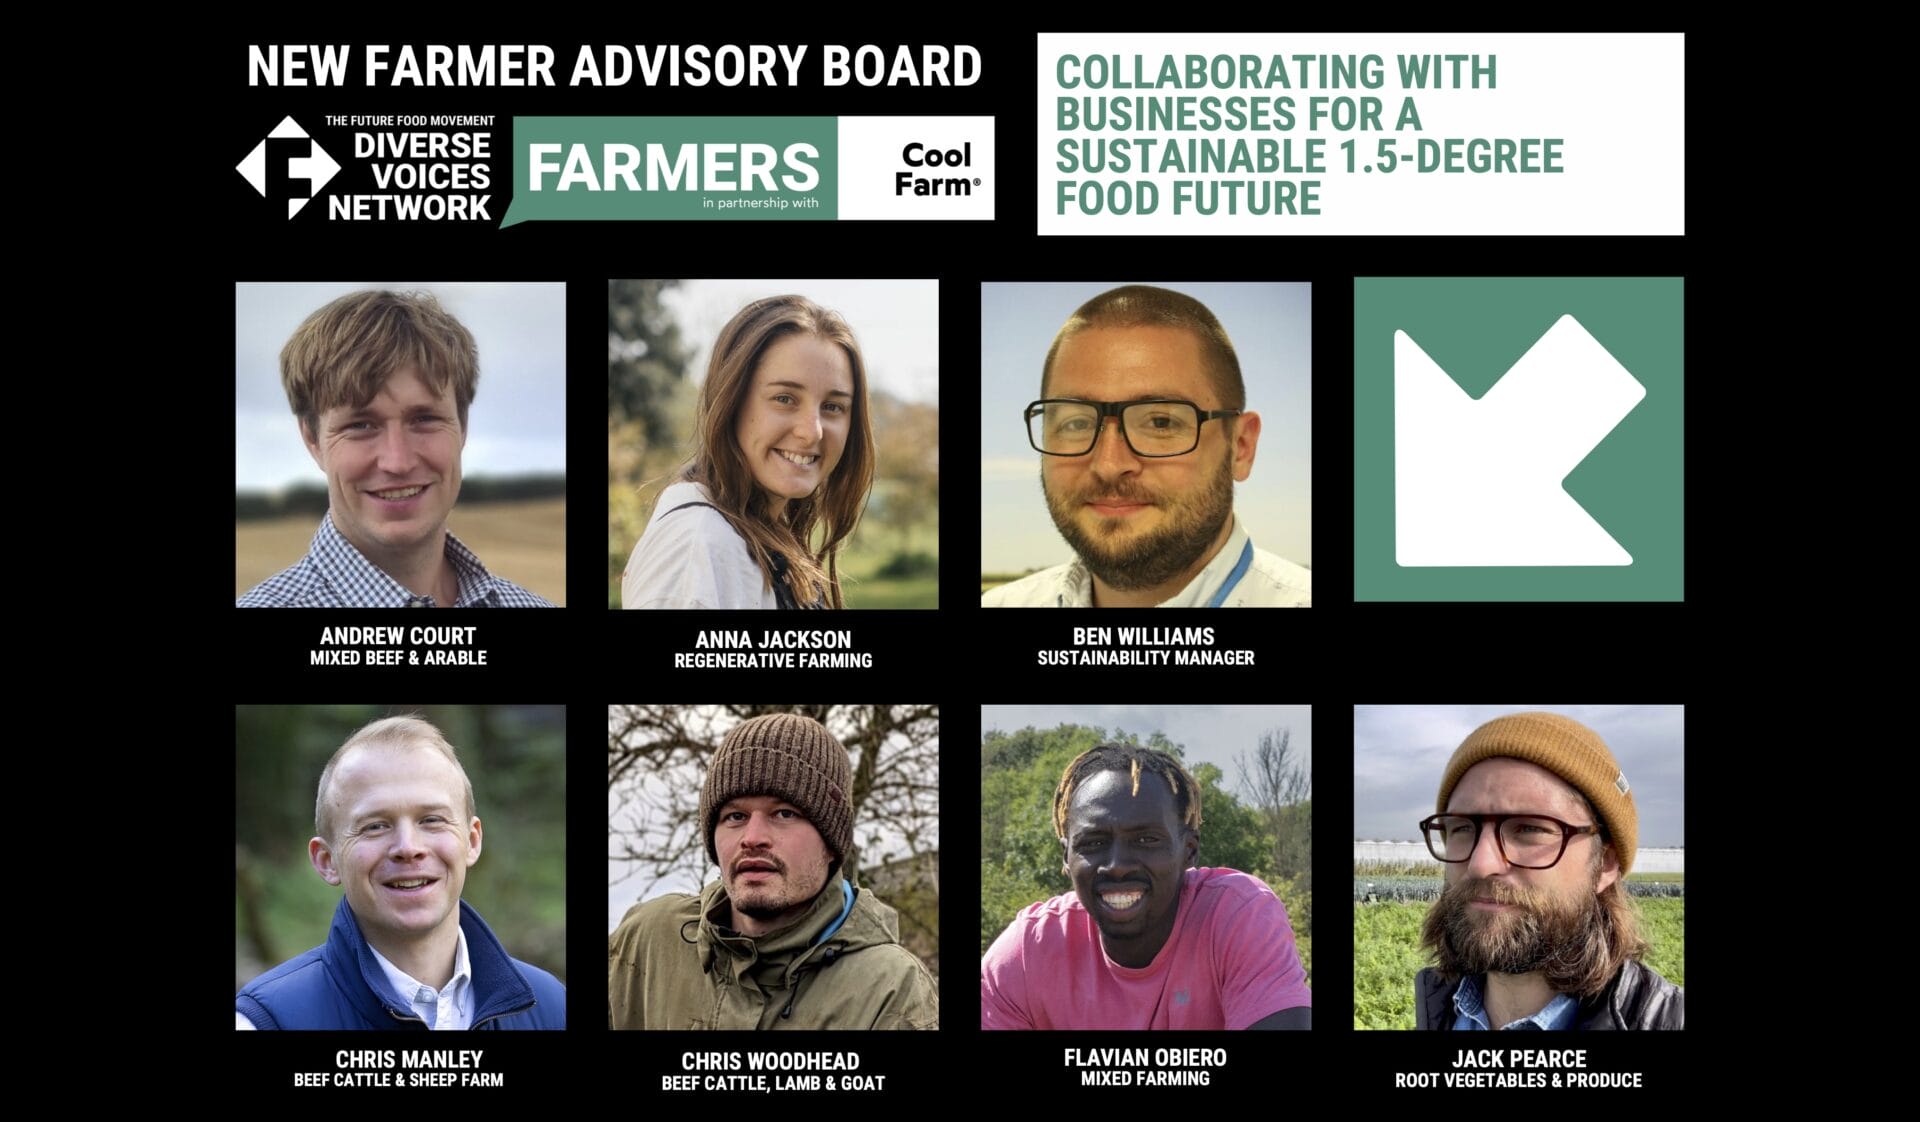 New Farmer Advisory Board collaborates with members for a sustainable 1.5 degree food future